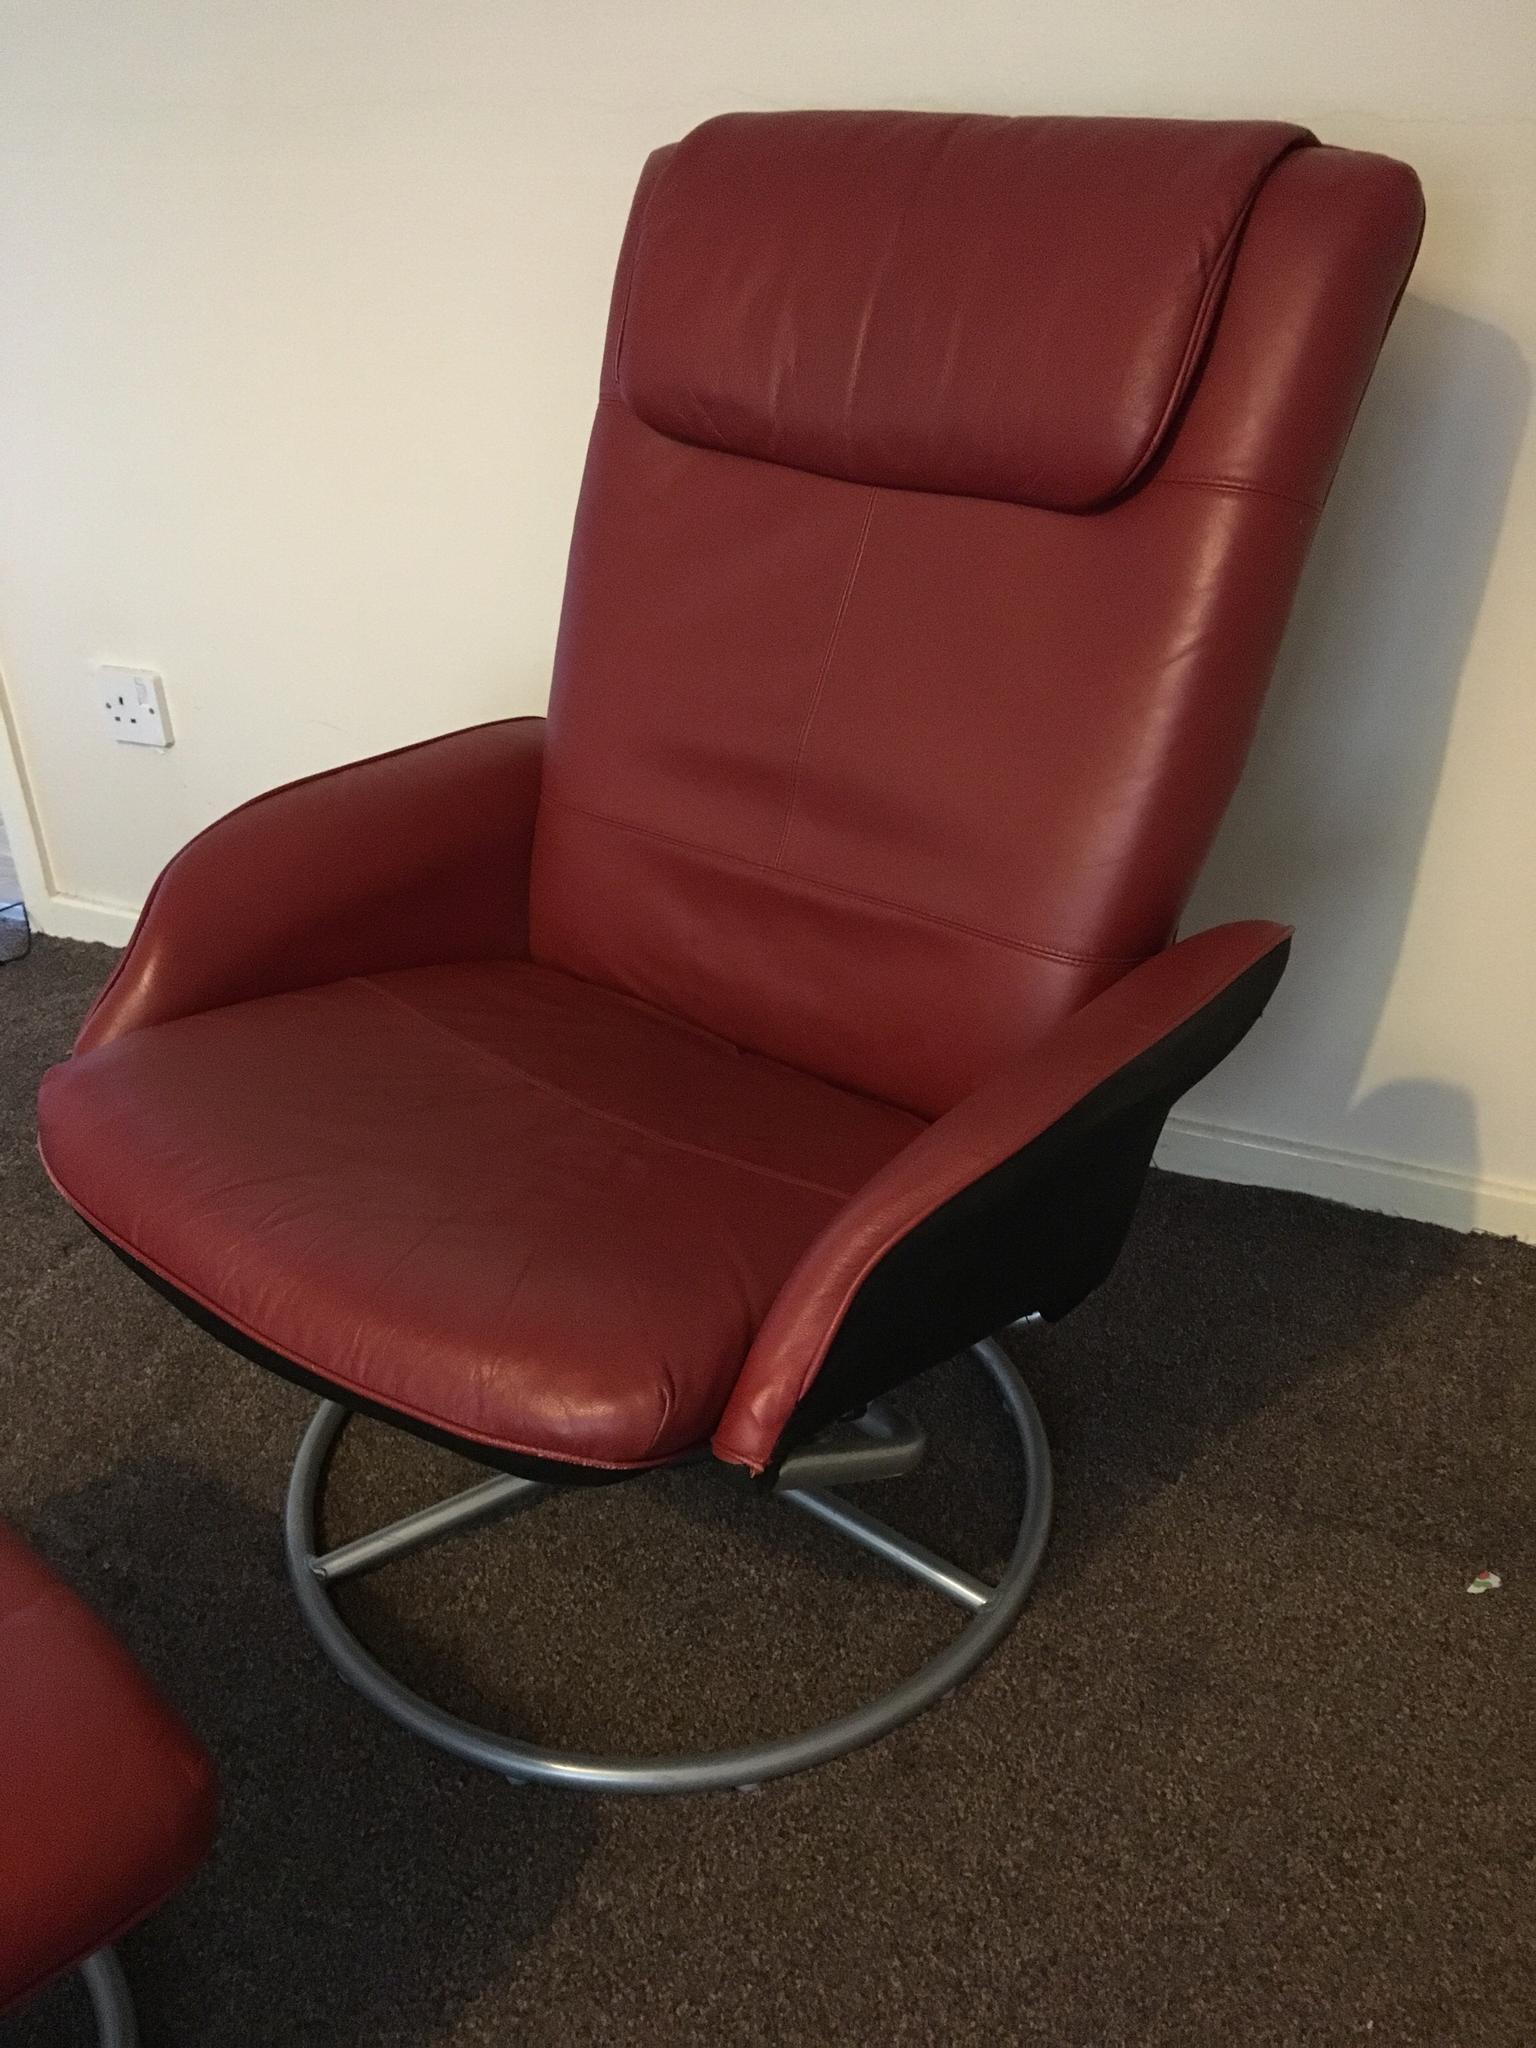 Red Leather Swivel Chair And Footstool, Ikea Leather Chair And Ottoman